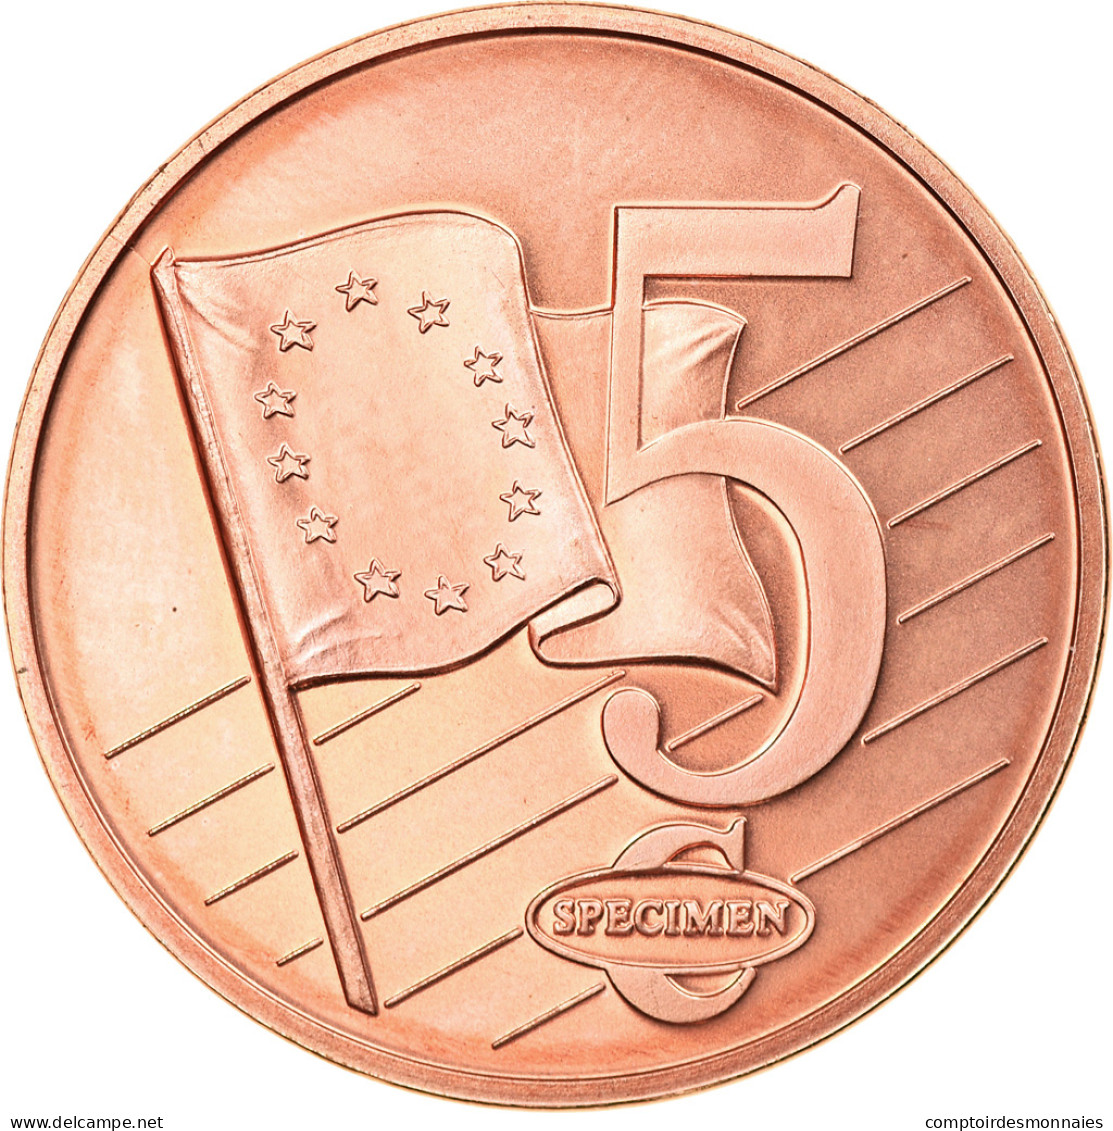 Vatican, 5 Euro Cent, 2011, Unofficial Private Coin, SPL, Copper Plated Steel - Privéproeven